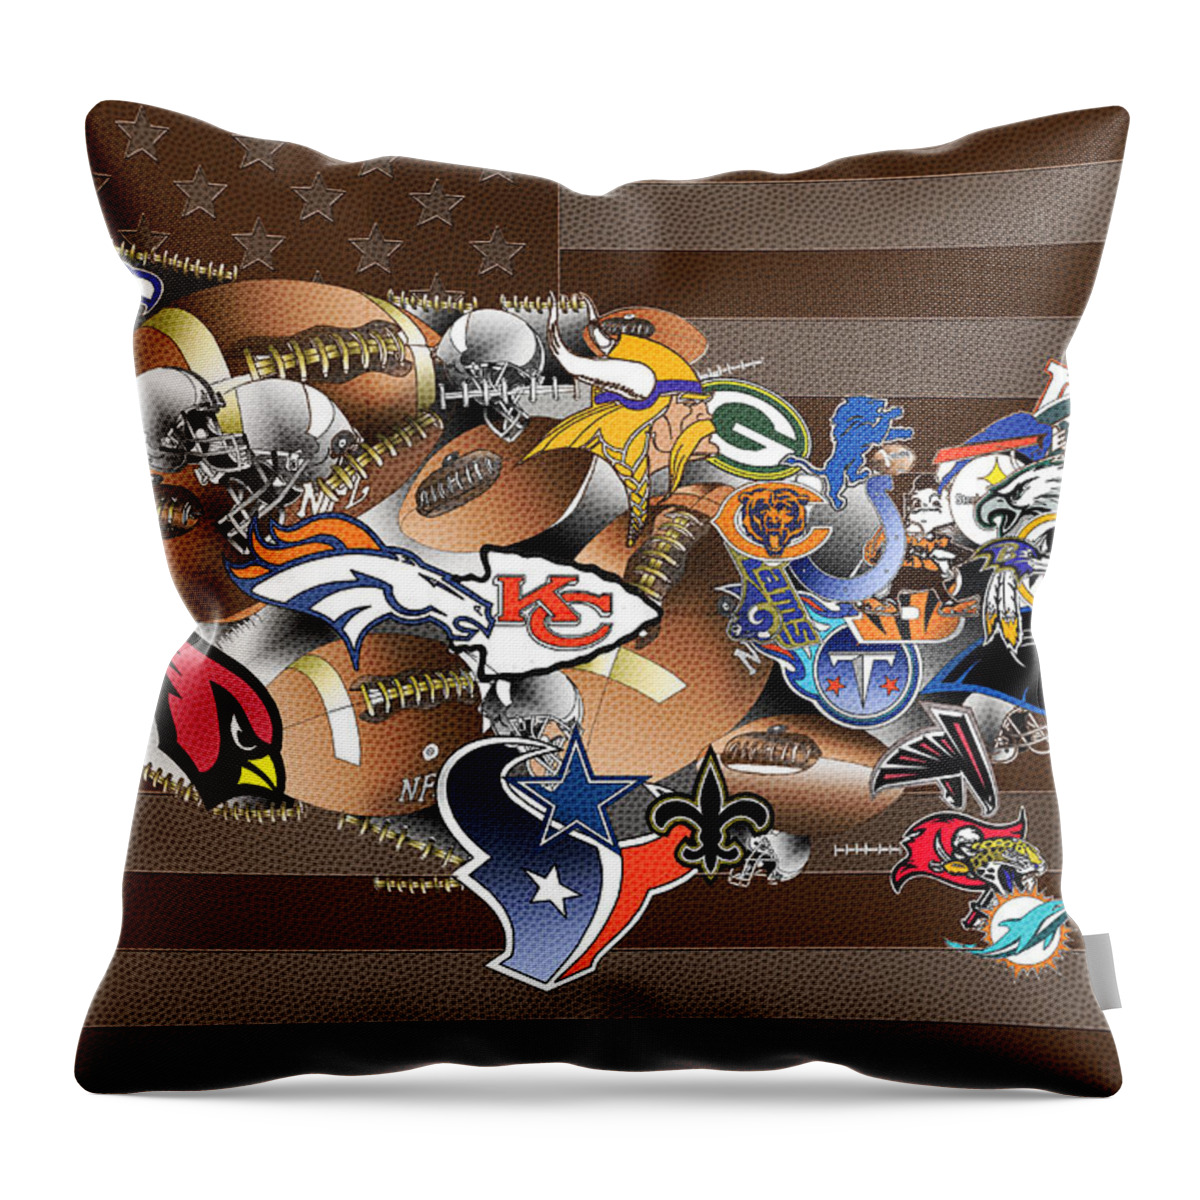 Nfl Throw Pillow featuring the painting Usa Nfl Map Collage 2 by Bekim M